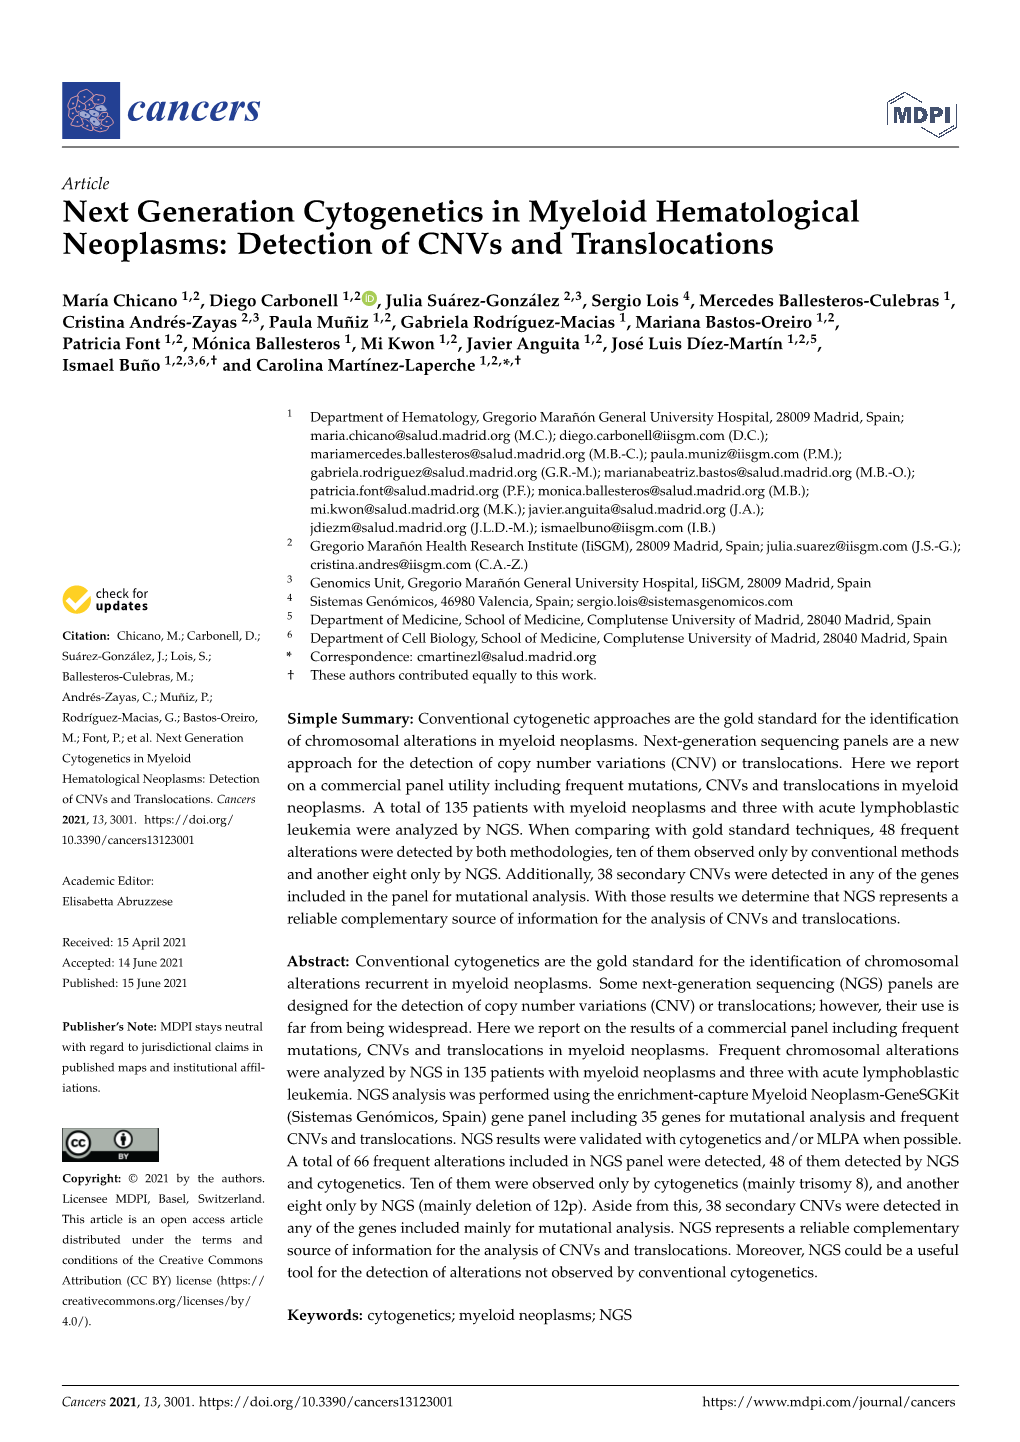 Next Generation Cytogenetics in Myeloid Hematological Neoplasms: Detection of Cnvs and Translocations